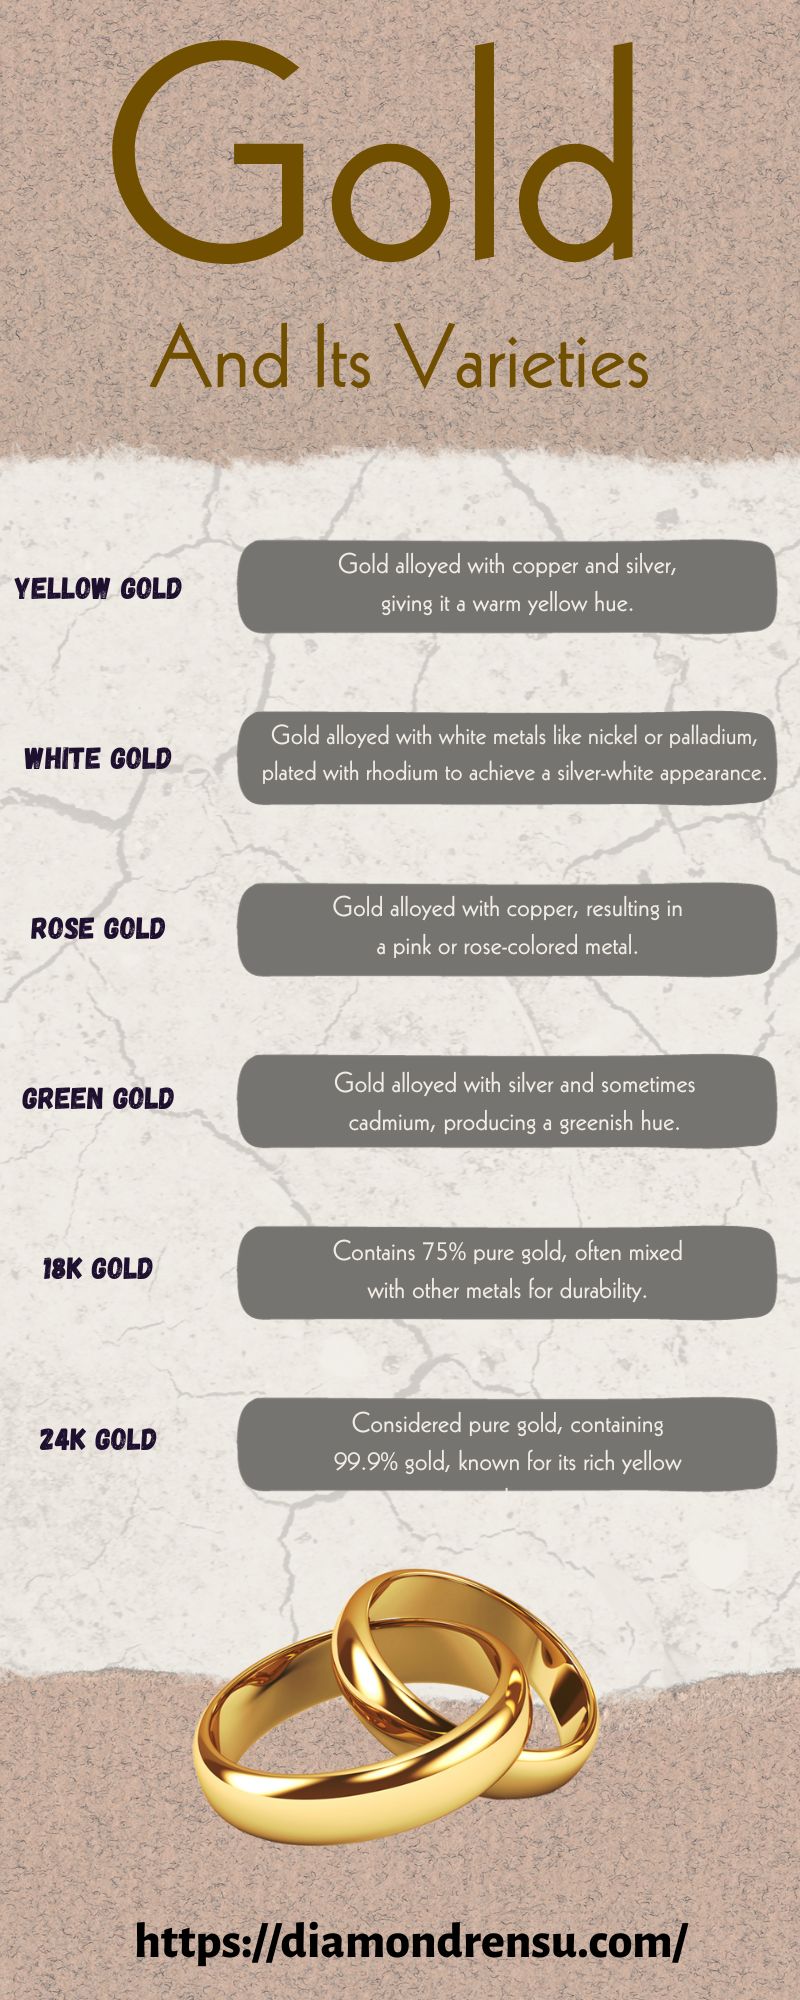 Gold and Its Varieties Infographic